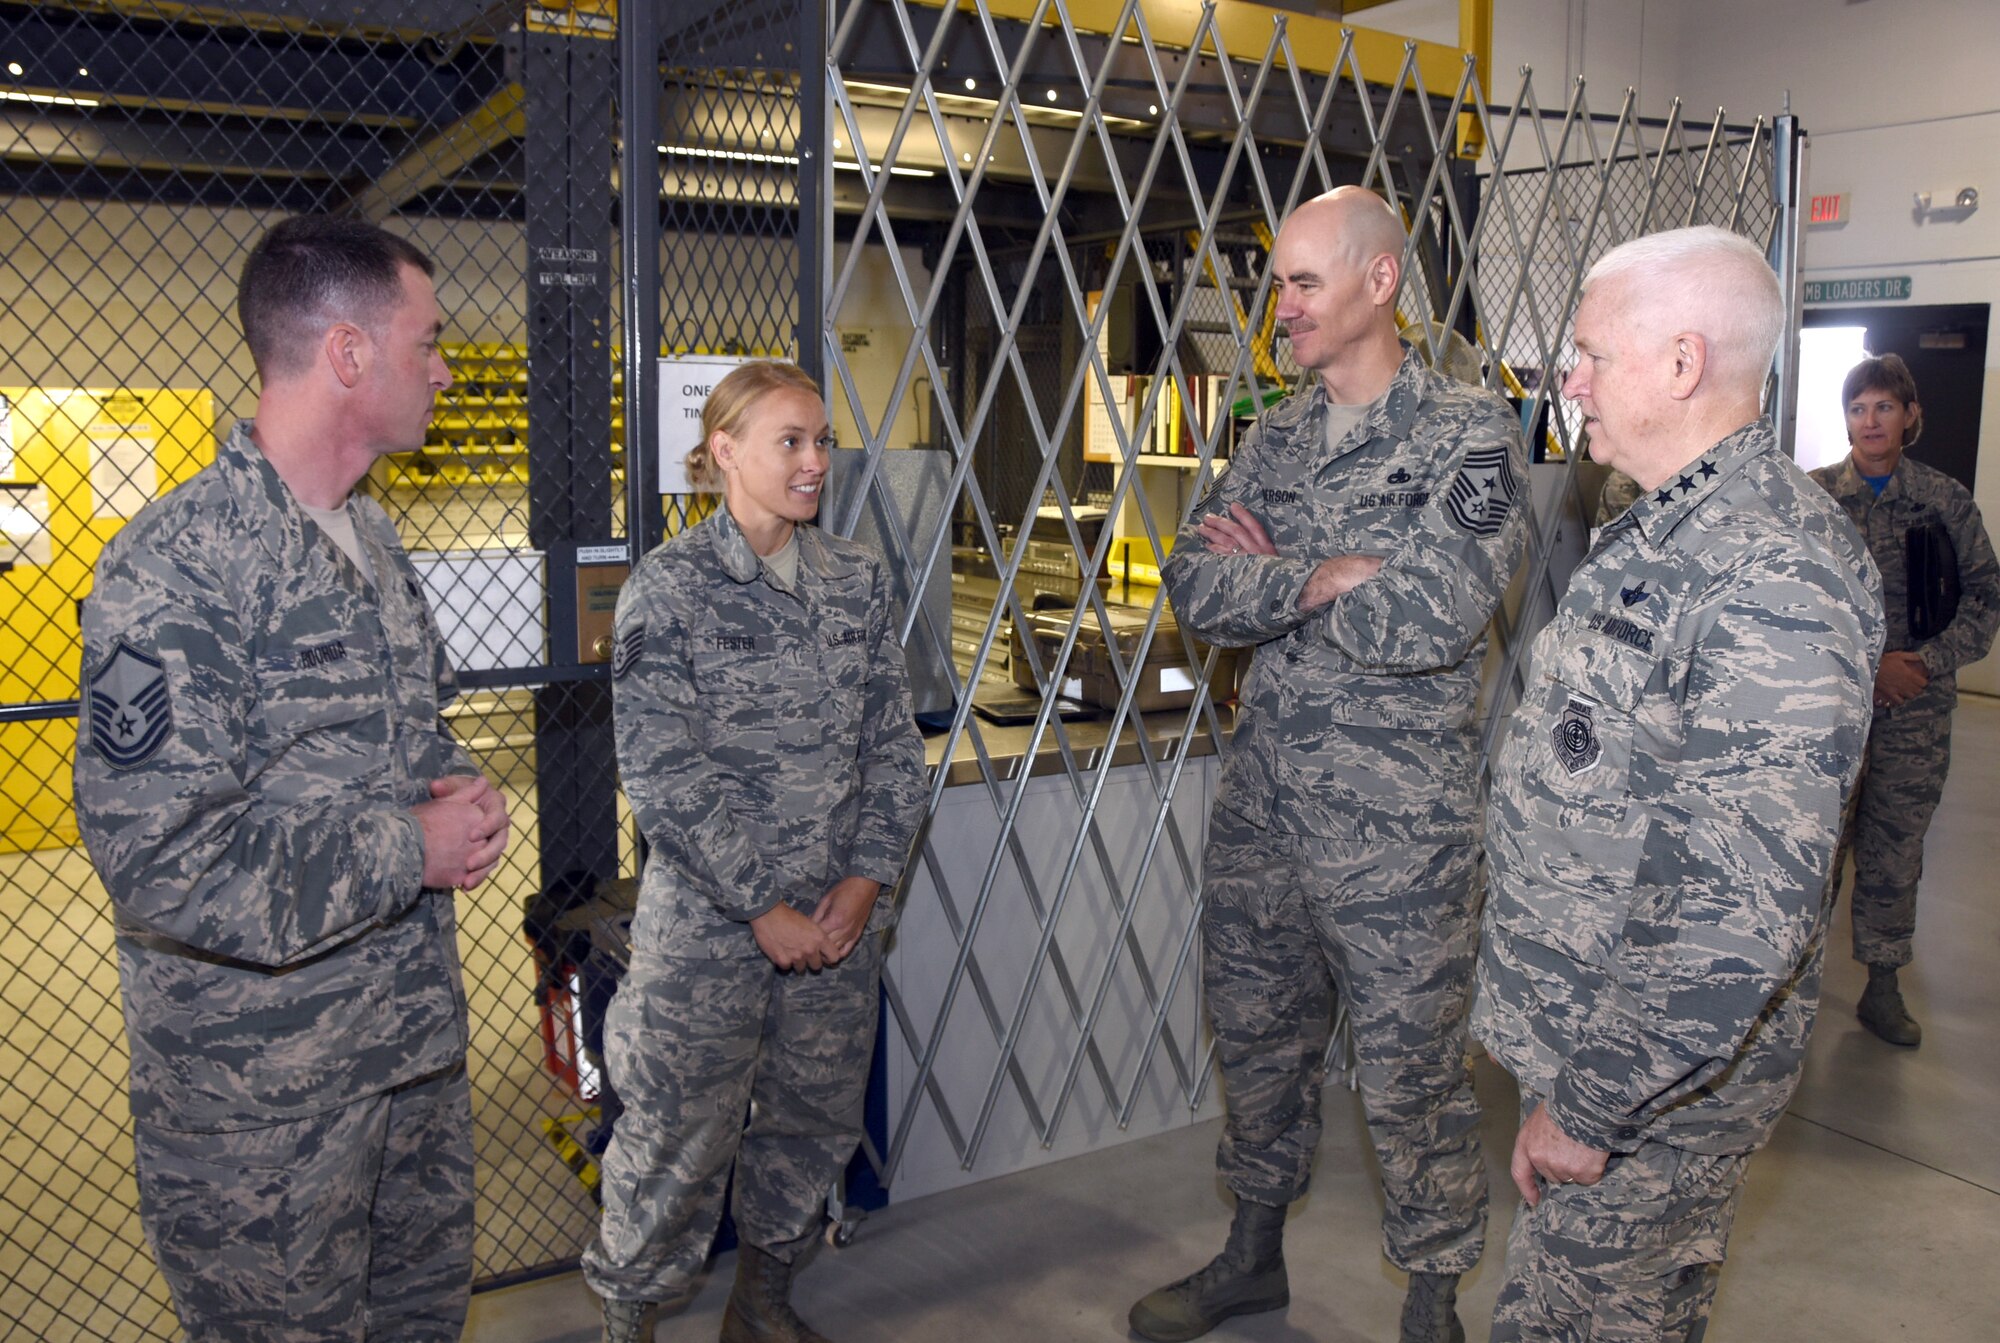 Lt. Gen. L. Scott Rice, Air National Guard director, addresses Airmen from the 114th Fighter Wing during a recognition ceremony at Joe Foss Field, S.D., Nov. 6, 2016. Rice is responsible for formulating, developing and coordinating all policies, plans, and programs affecting more than 105,500 Guard members across the U.S. (U.S. Air National Guard photo by Tech. Sgt. Luke Olson/Released)